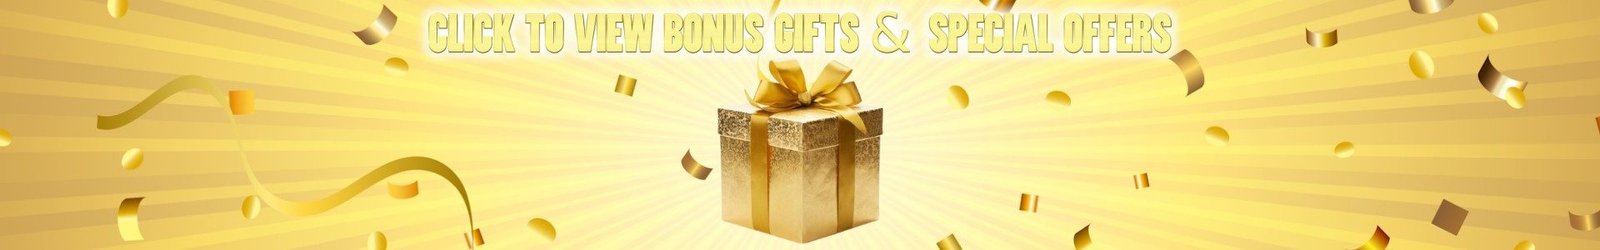 Bonus Gifts & Special Offers